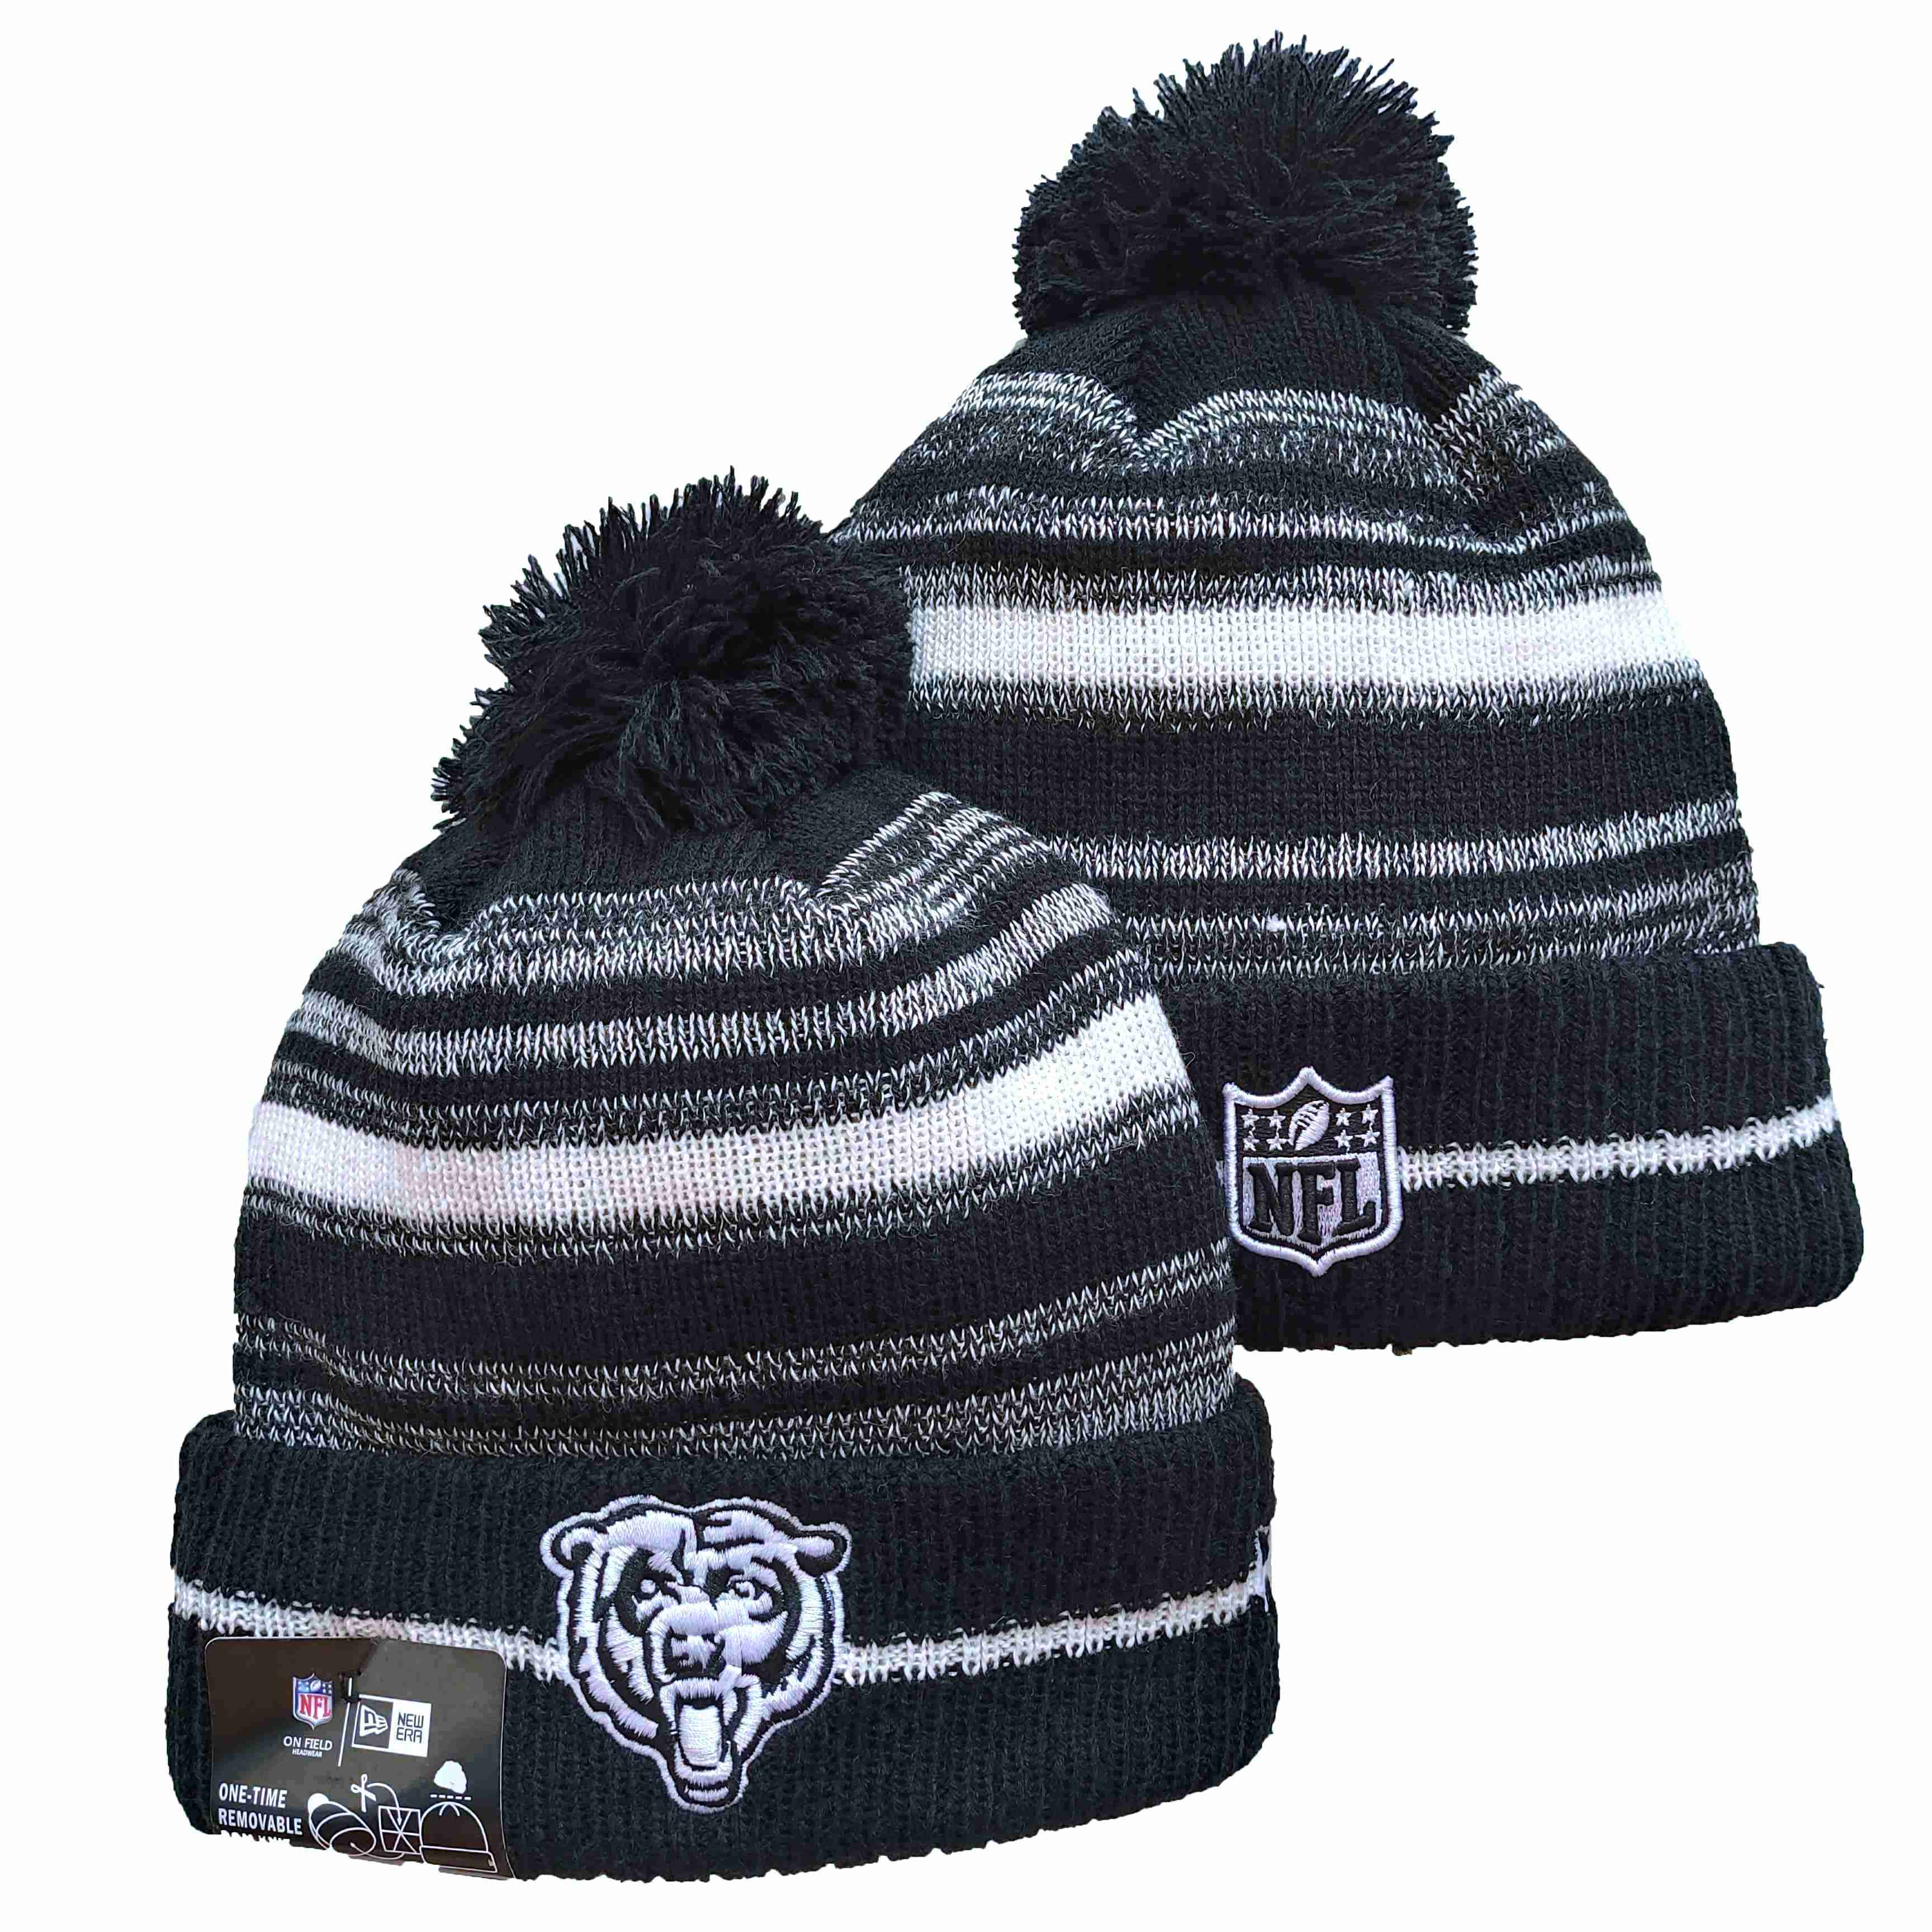 NFL Chicago Bears Beanies Knit Hats-YD894